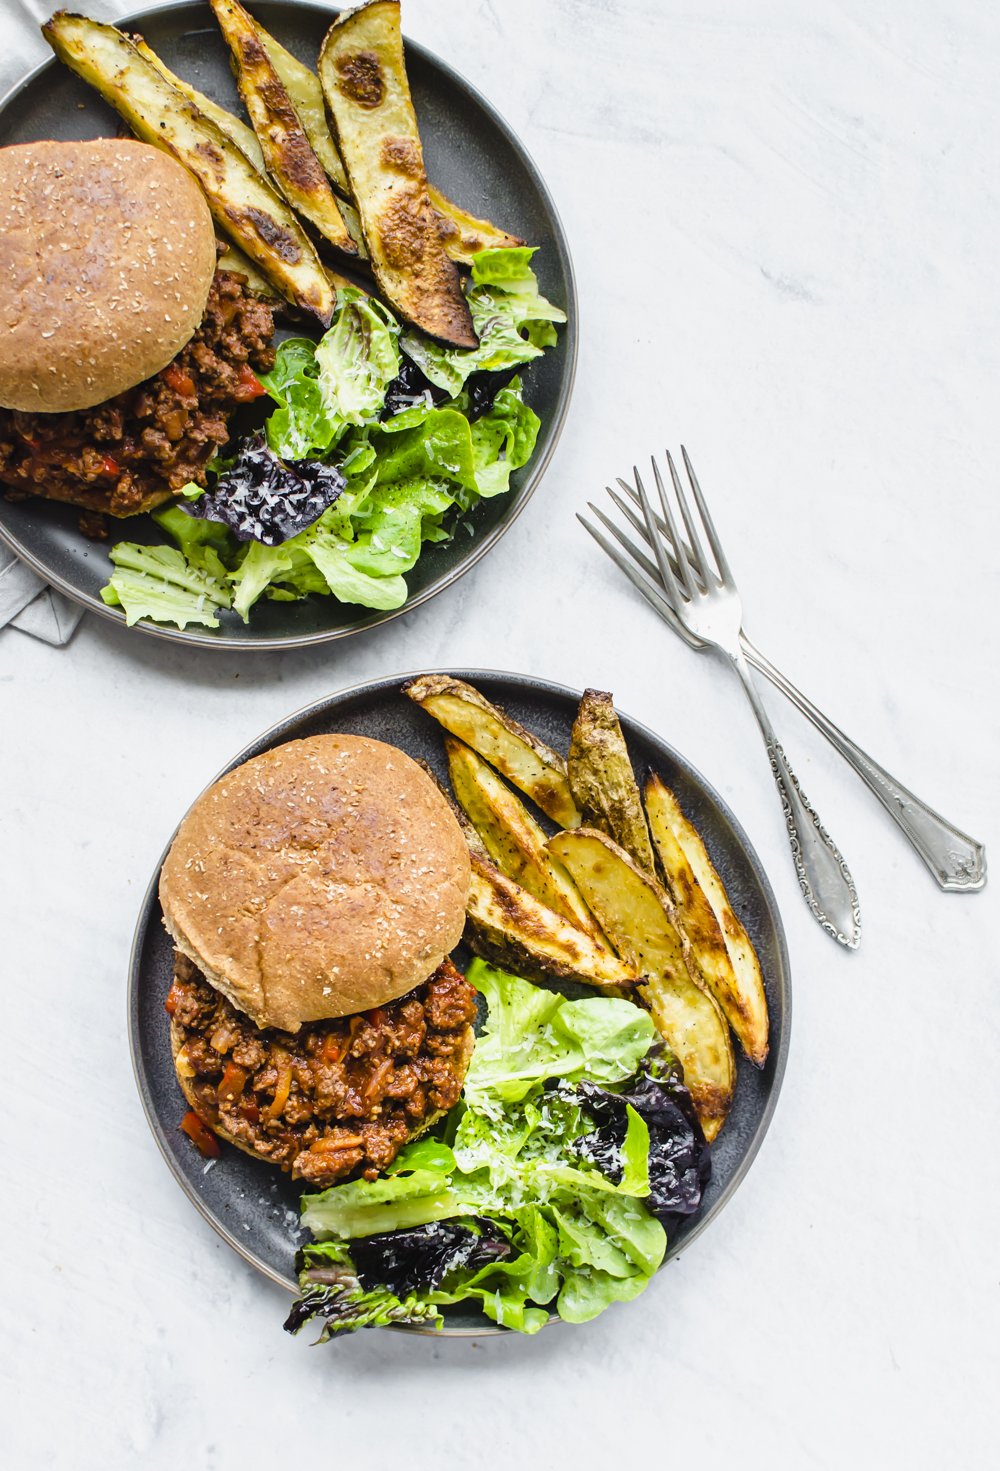 Two plates with forks and homemade sloppy joes, fries, and salad.